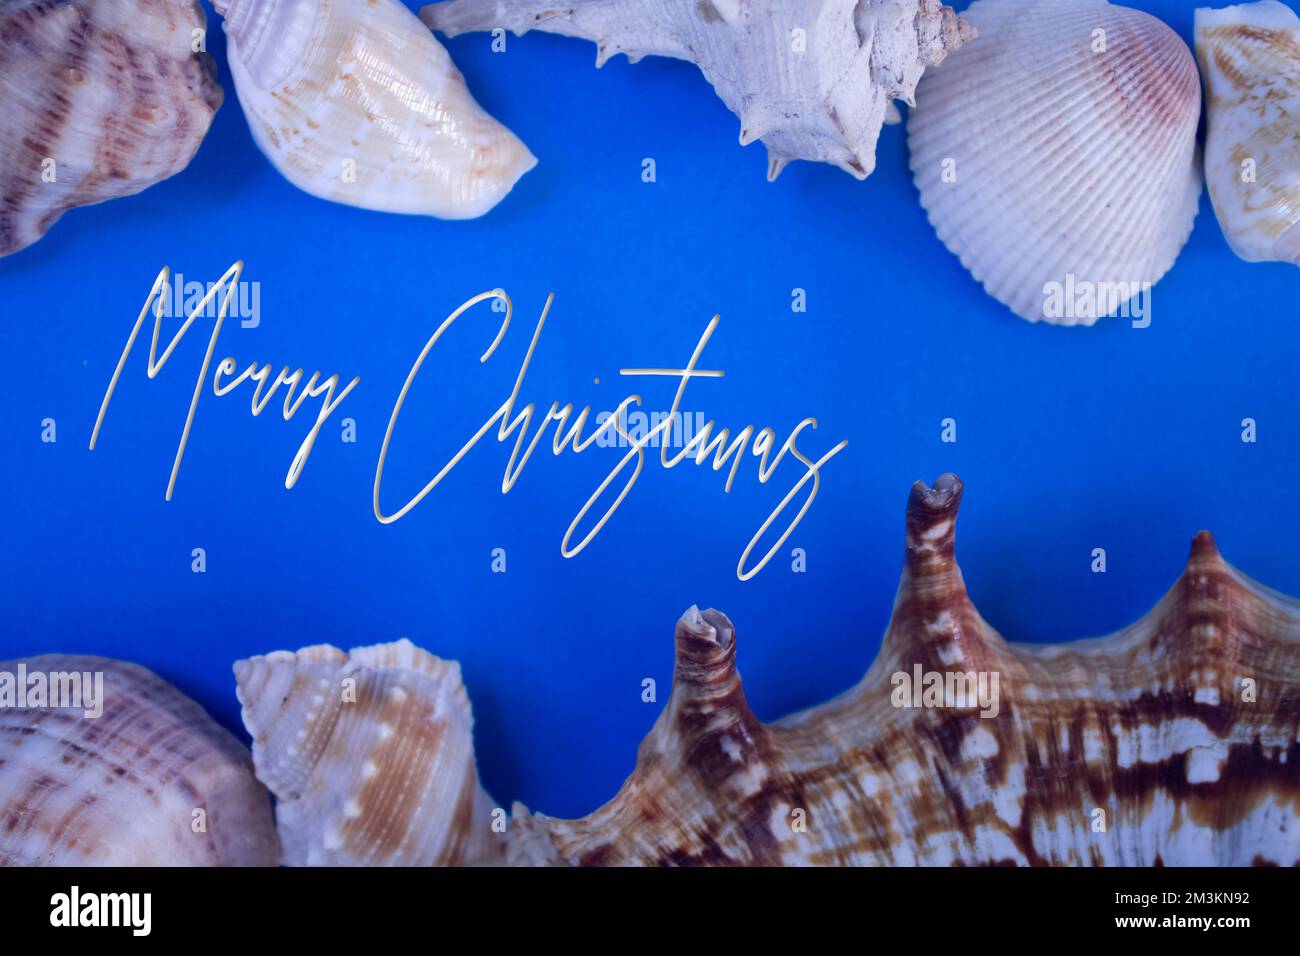 Animal Shell, Summer vacation, marine background with Merry Christmas text. Stock Photo